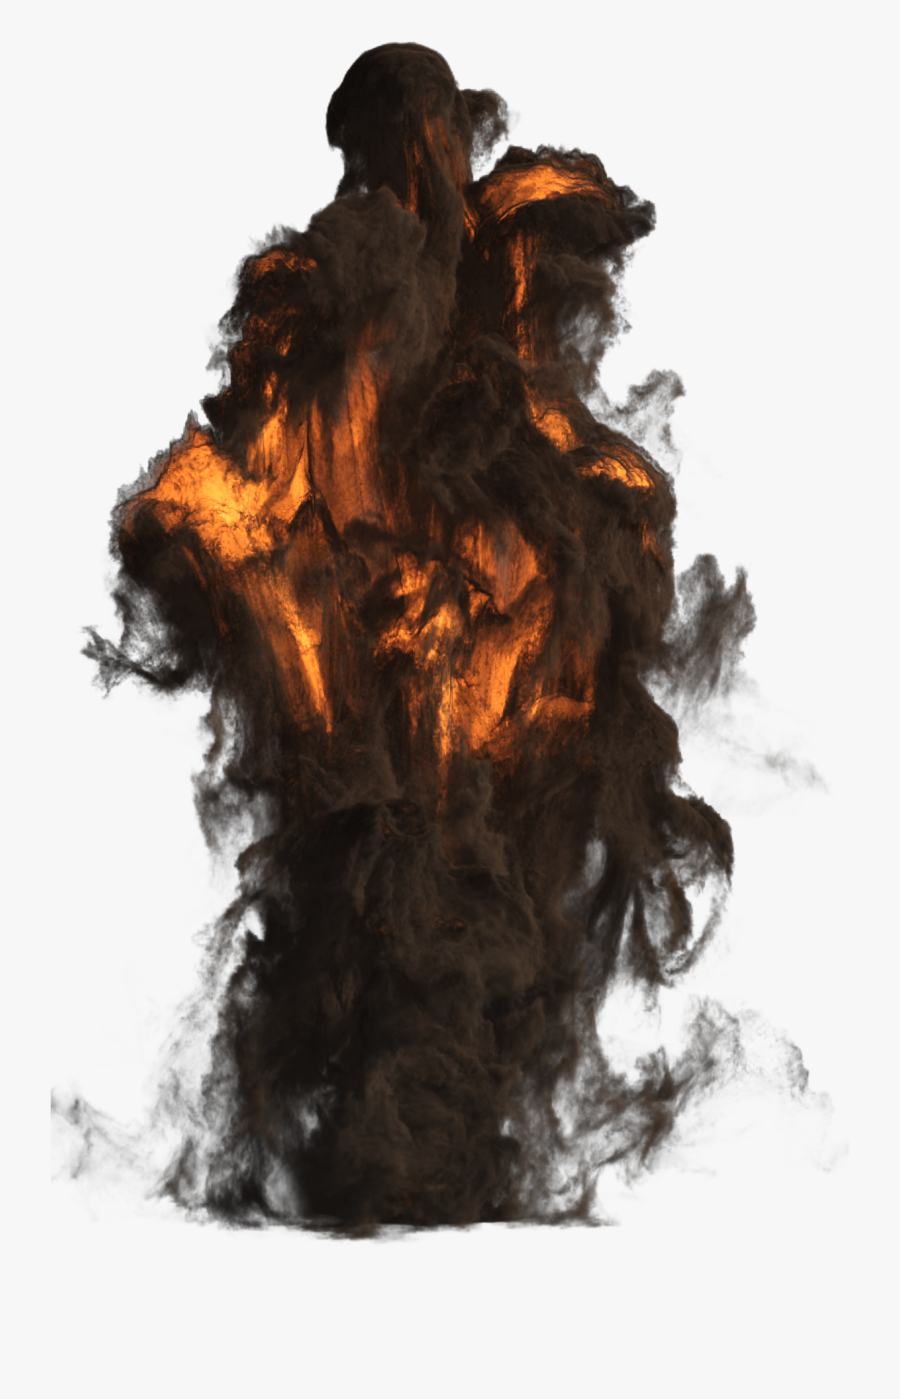 Big Explosion With Fire And Smoke Png Image - Fire And Smoke Png, Transparent Clipart